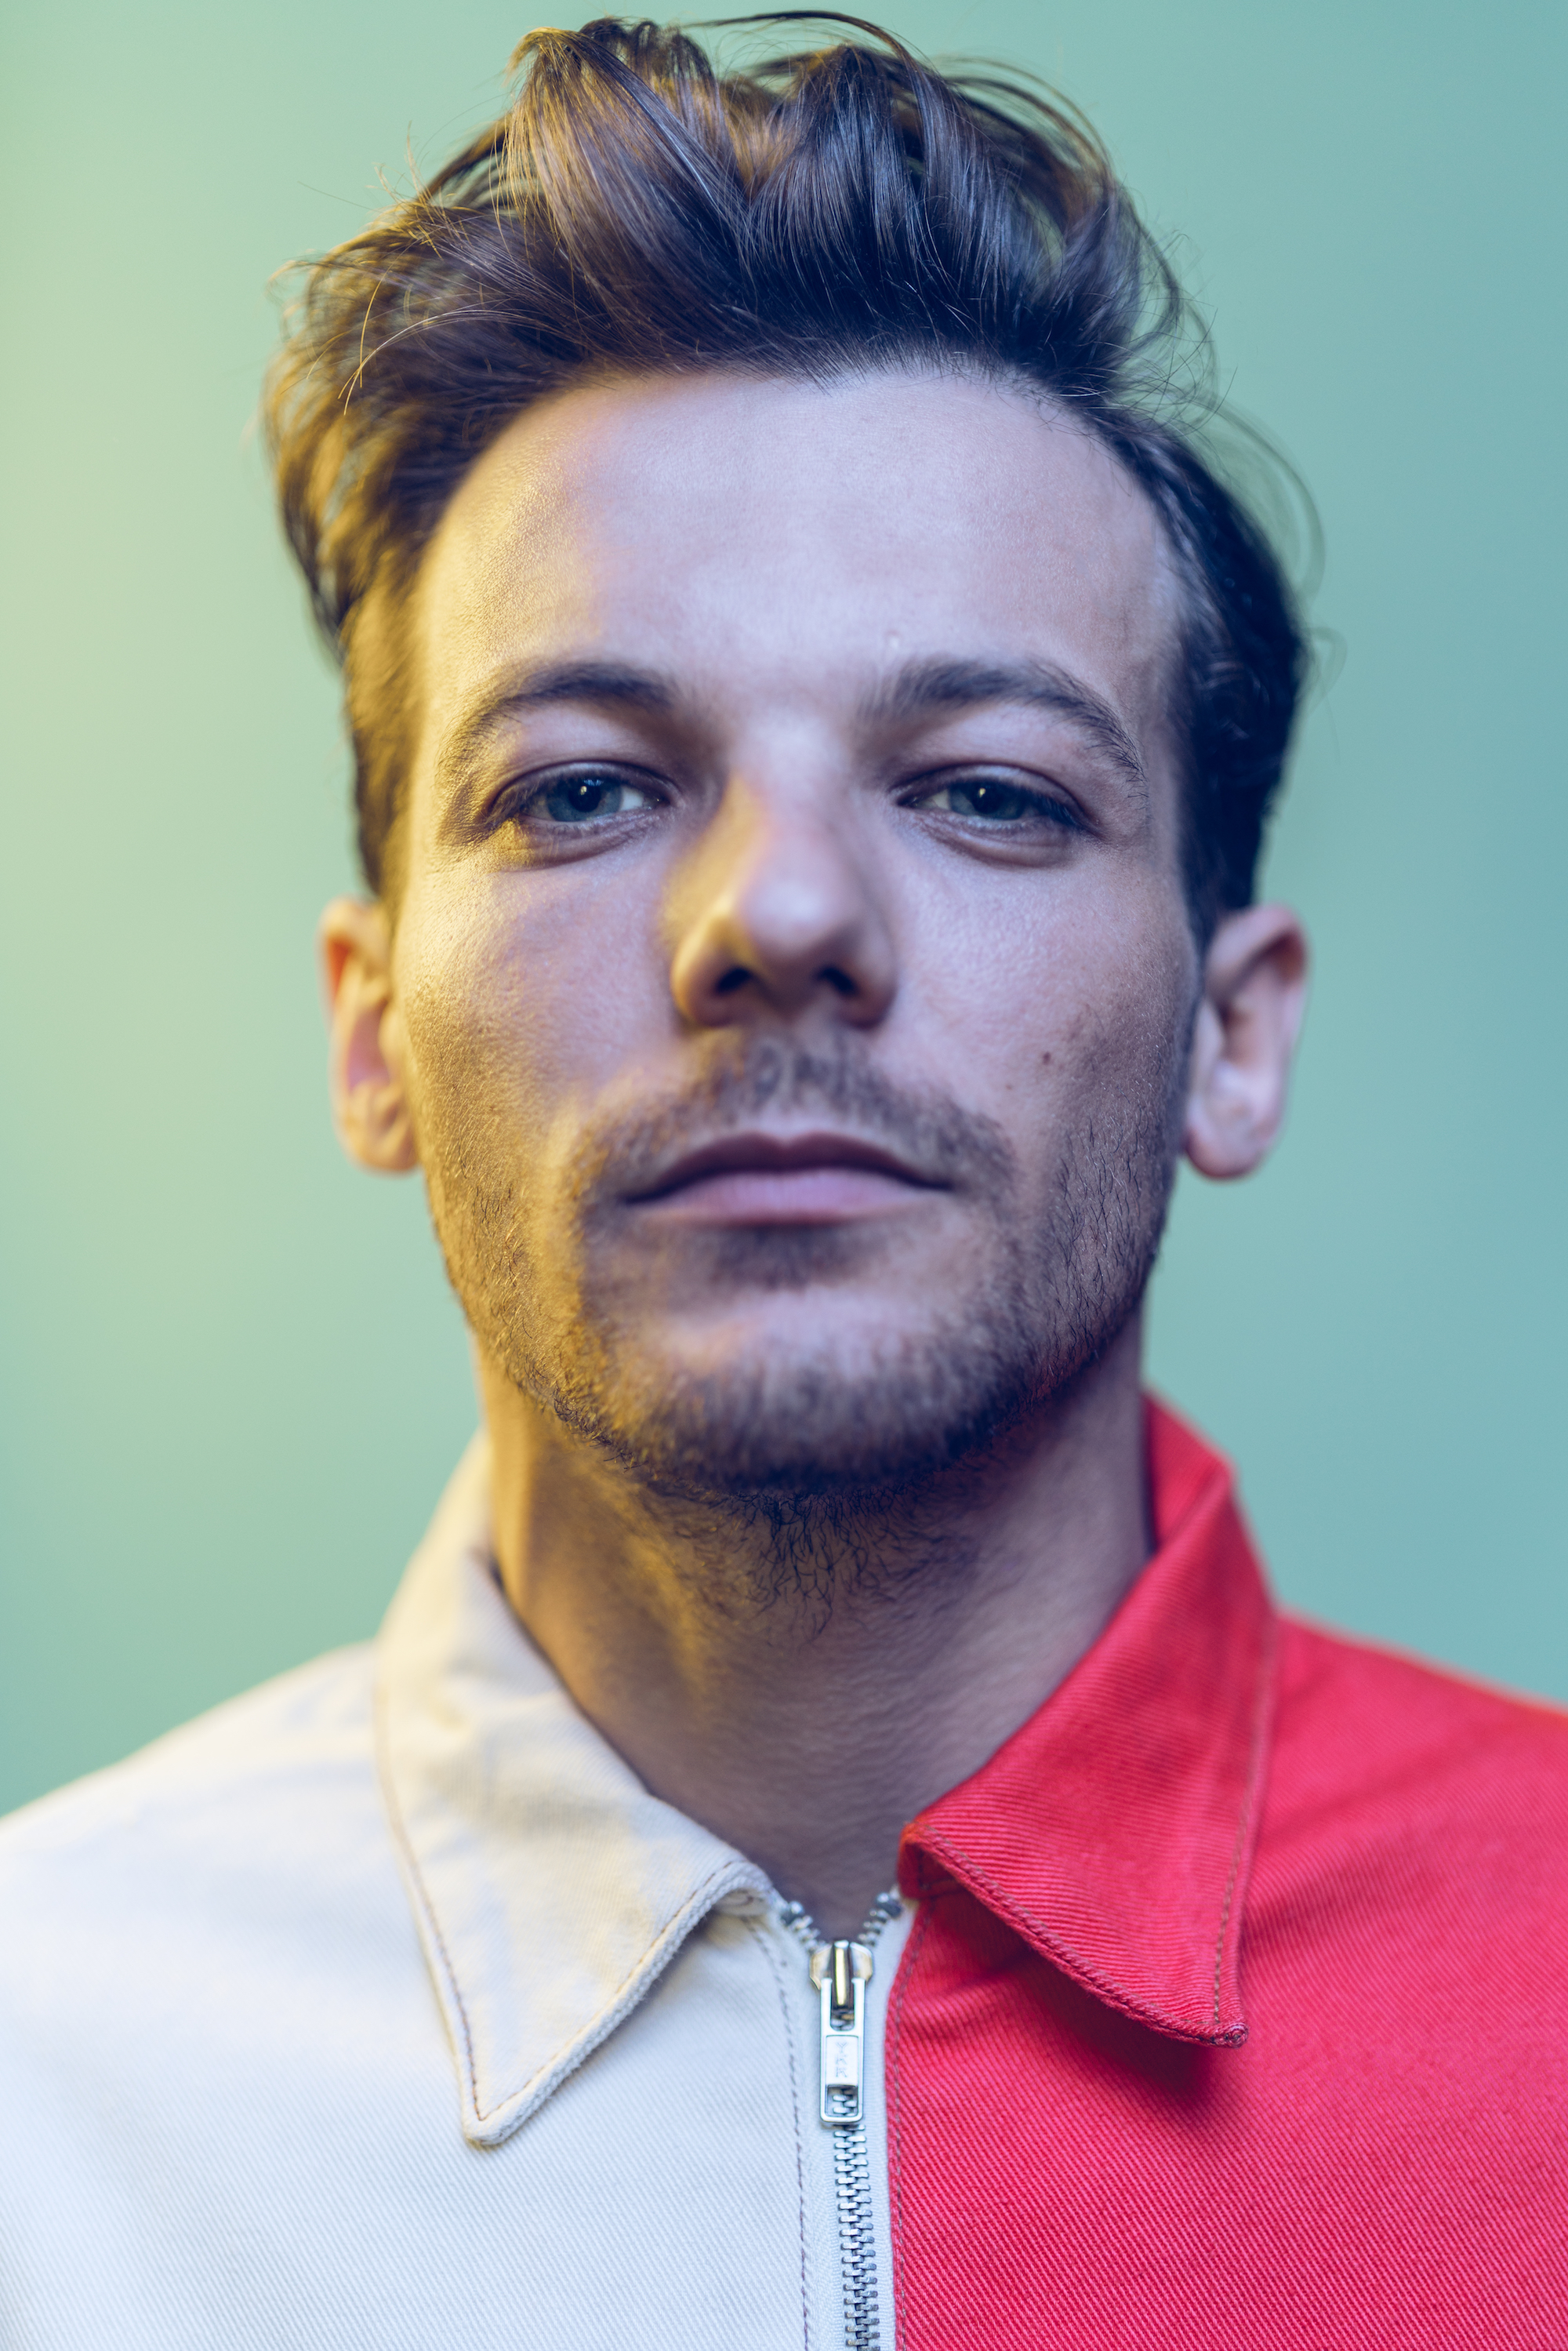 Being Louis Tomlinson - Noisey